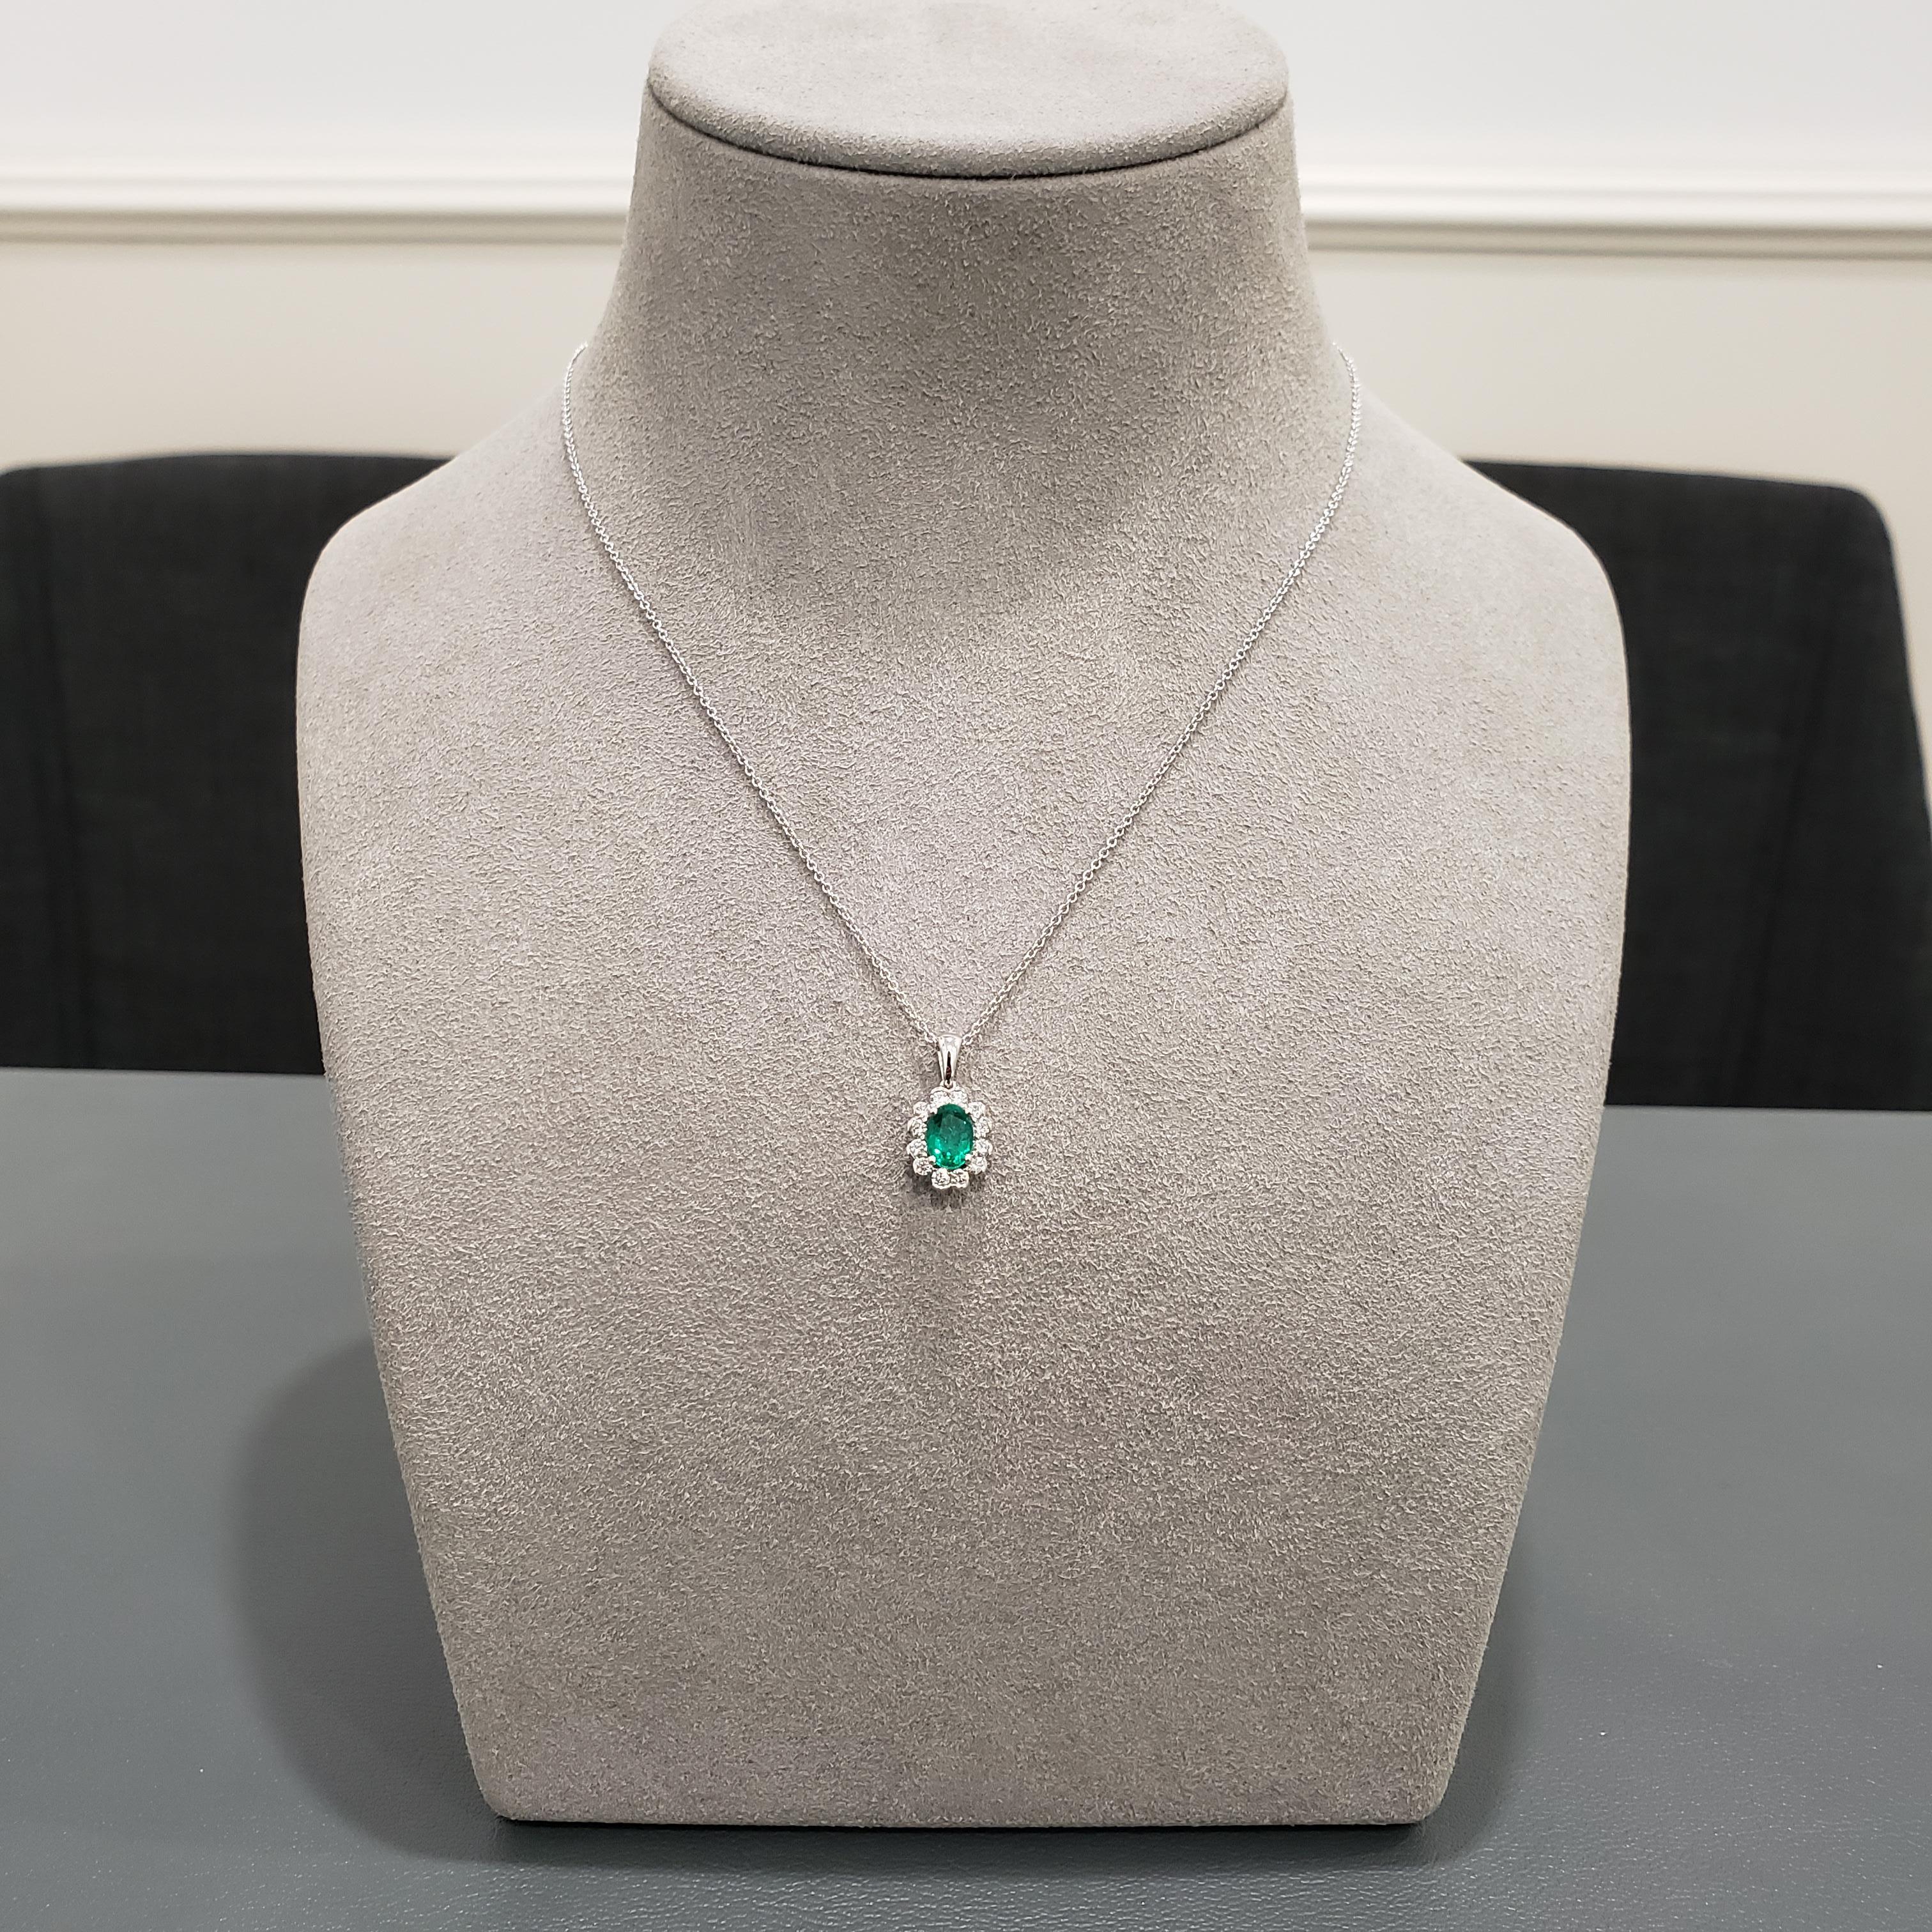 This pendant necklace of floral motif features a 0.71 carat oval cut green emerald, surrounded by a single row of round brilliant diamonds in a halo design weighing 0.30 carats total. Made in 18K white gold.

Style available in different price